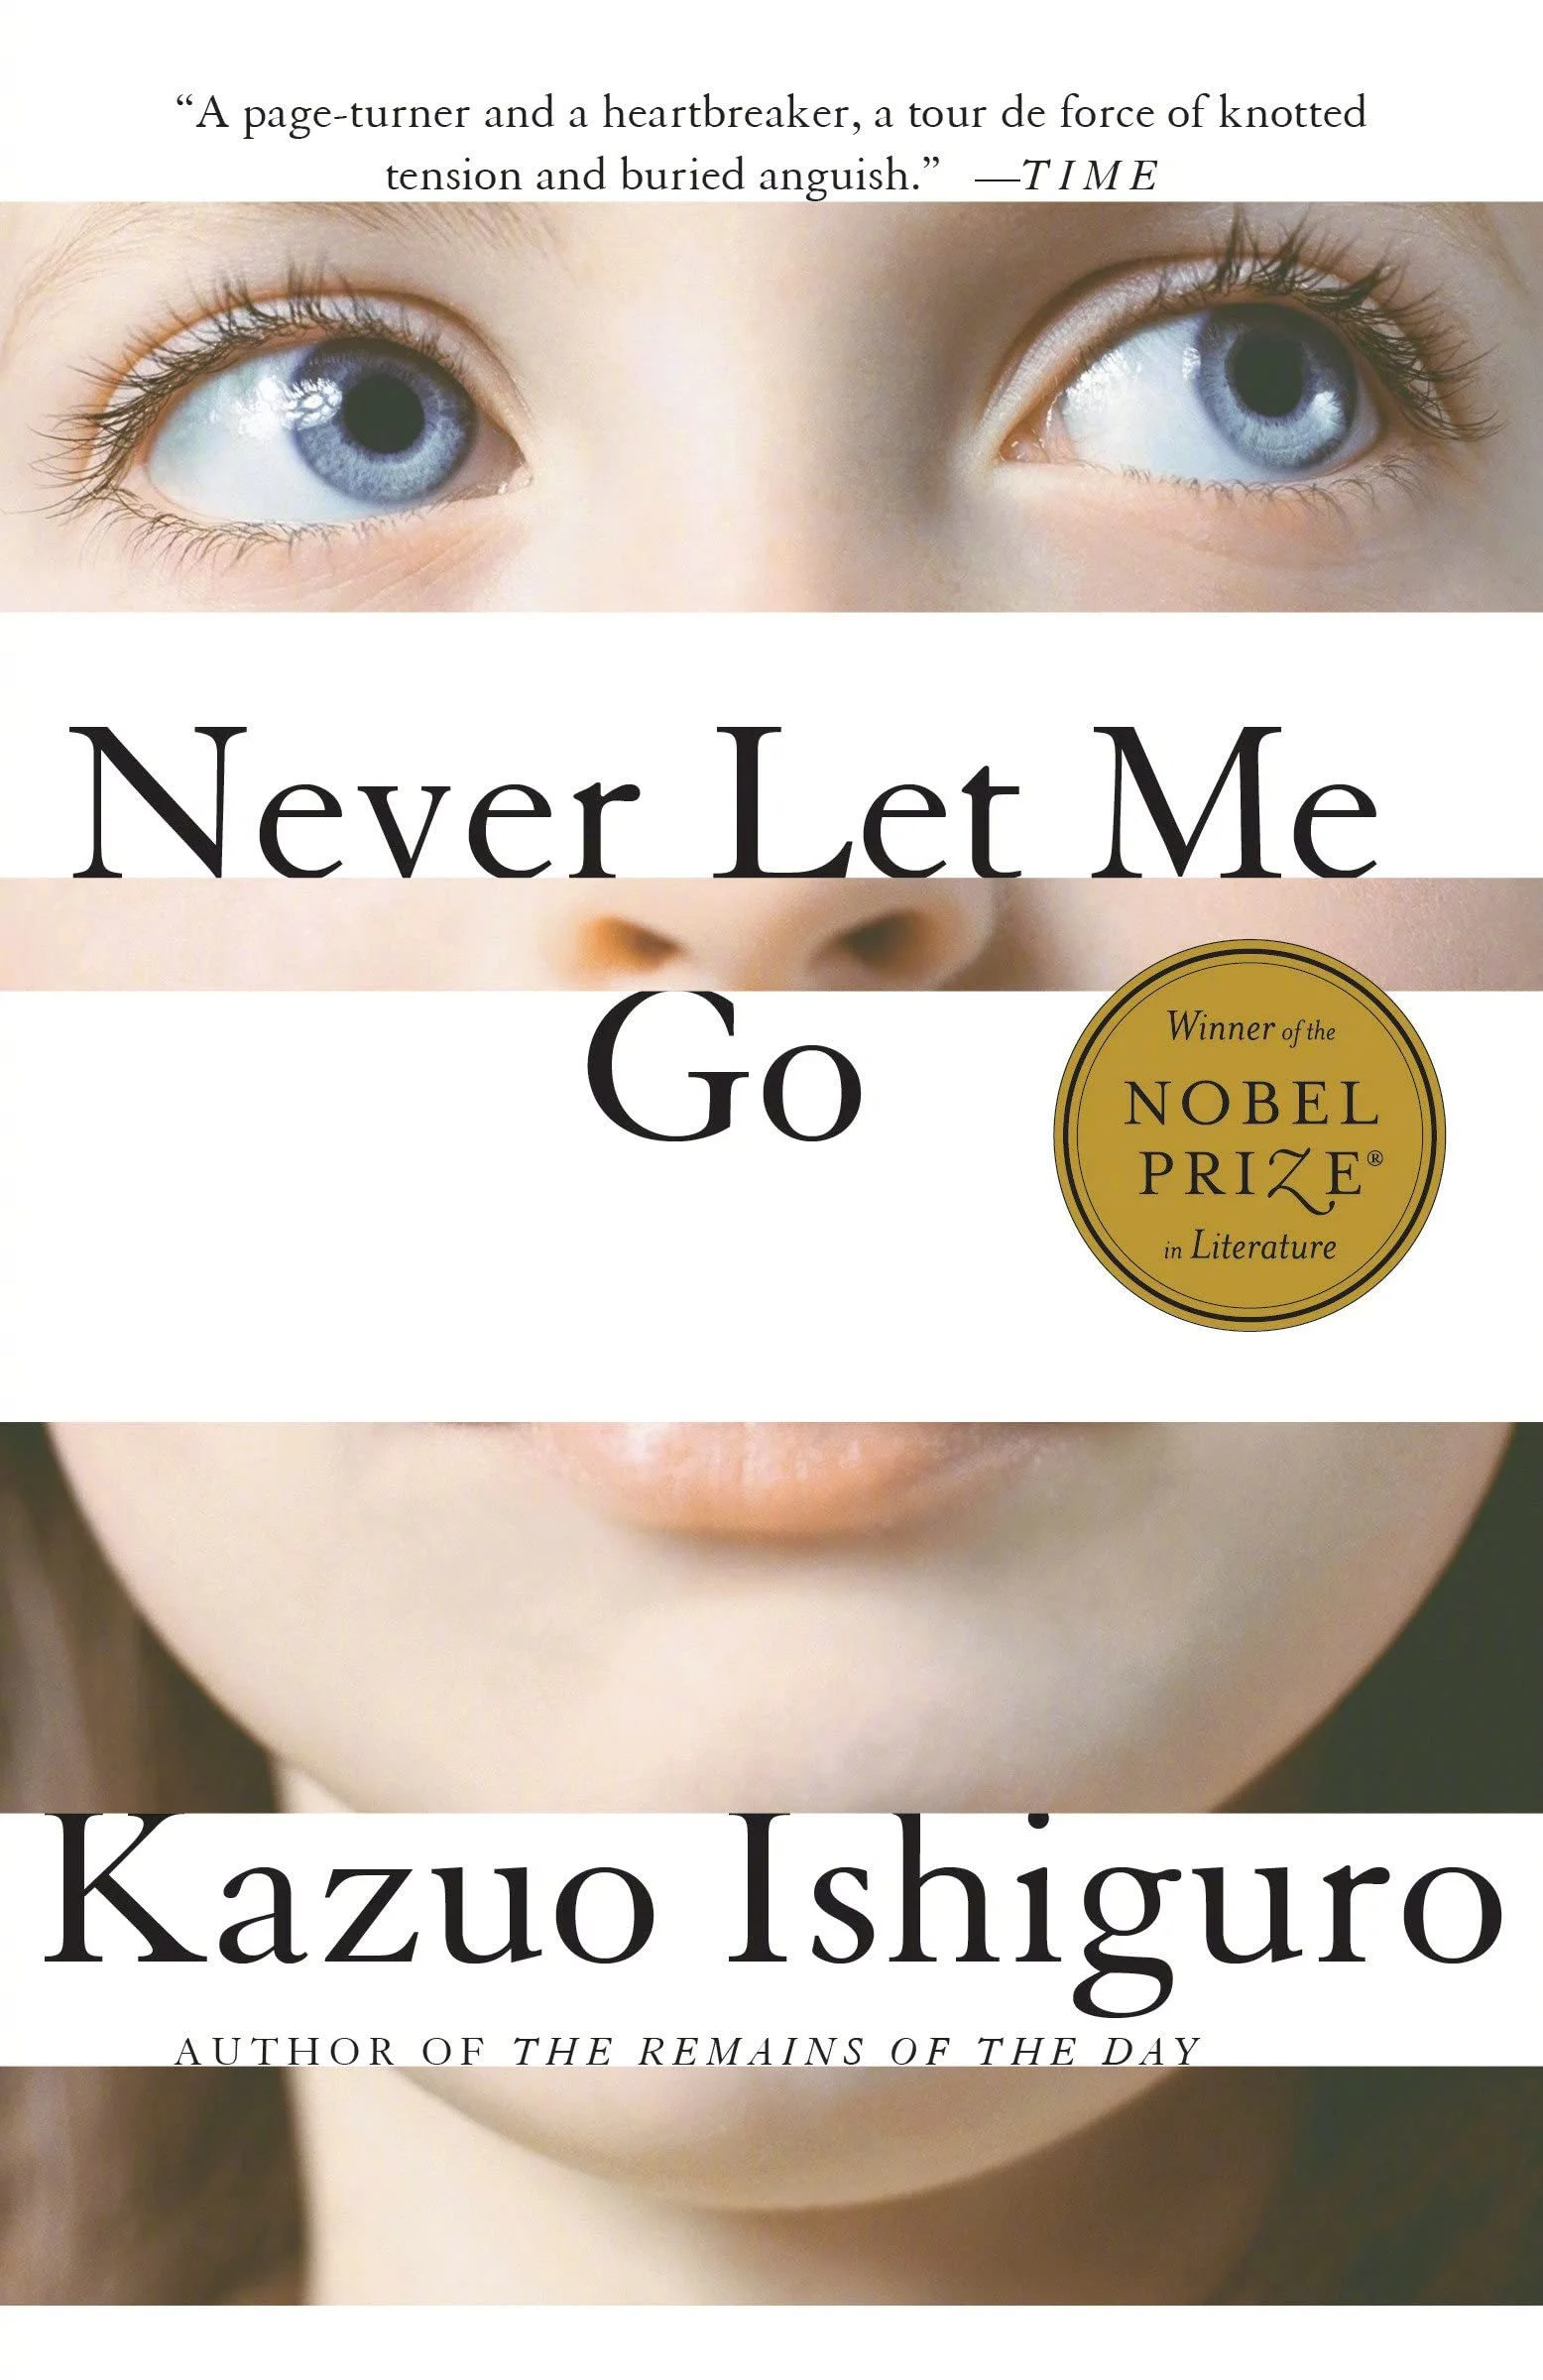 'Never Let Me Go' planned for TV series, FX is already developing